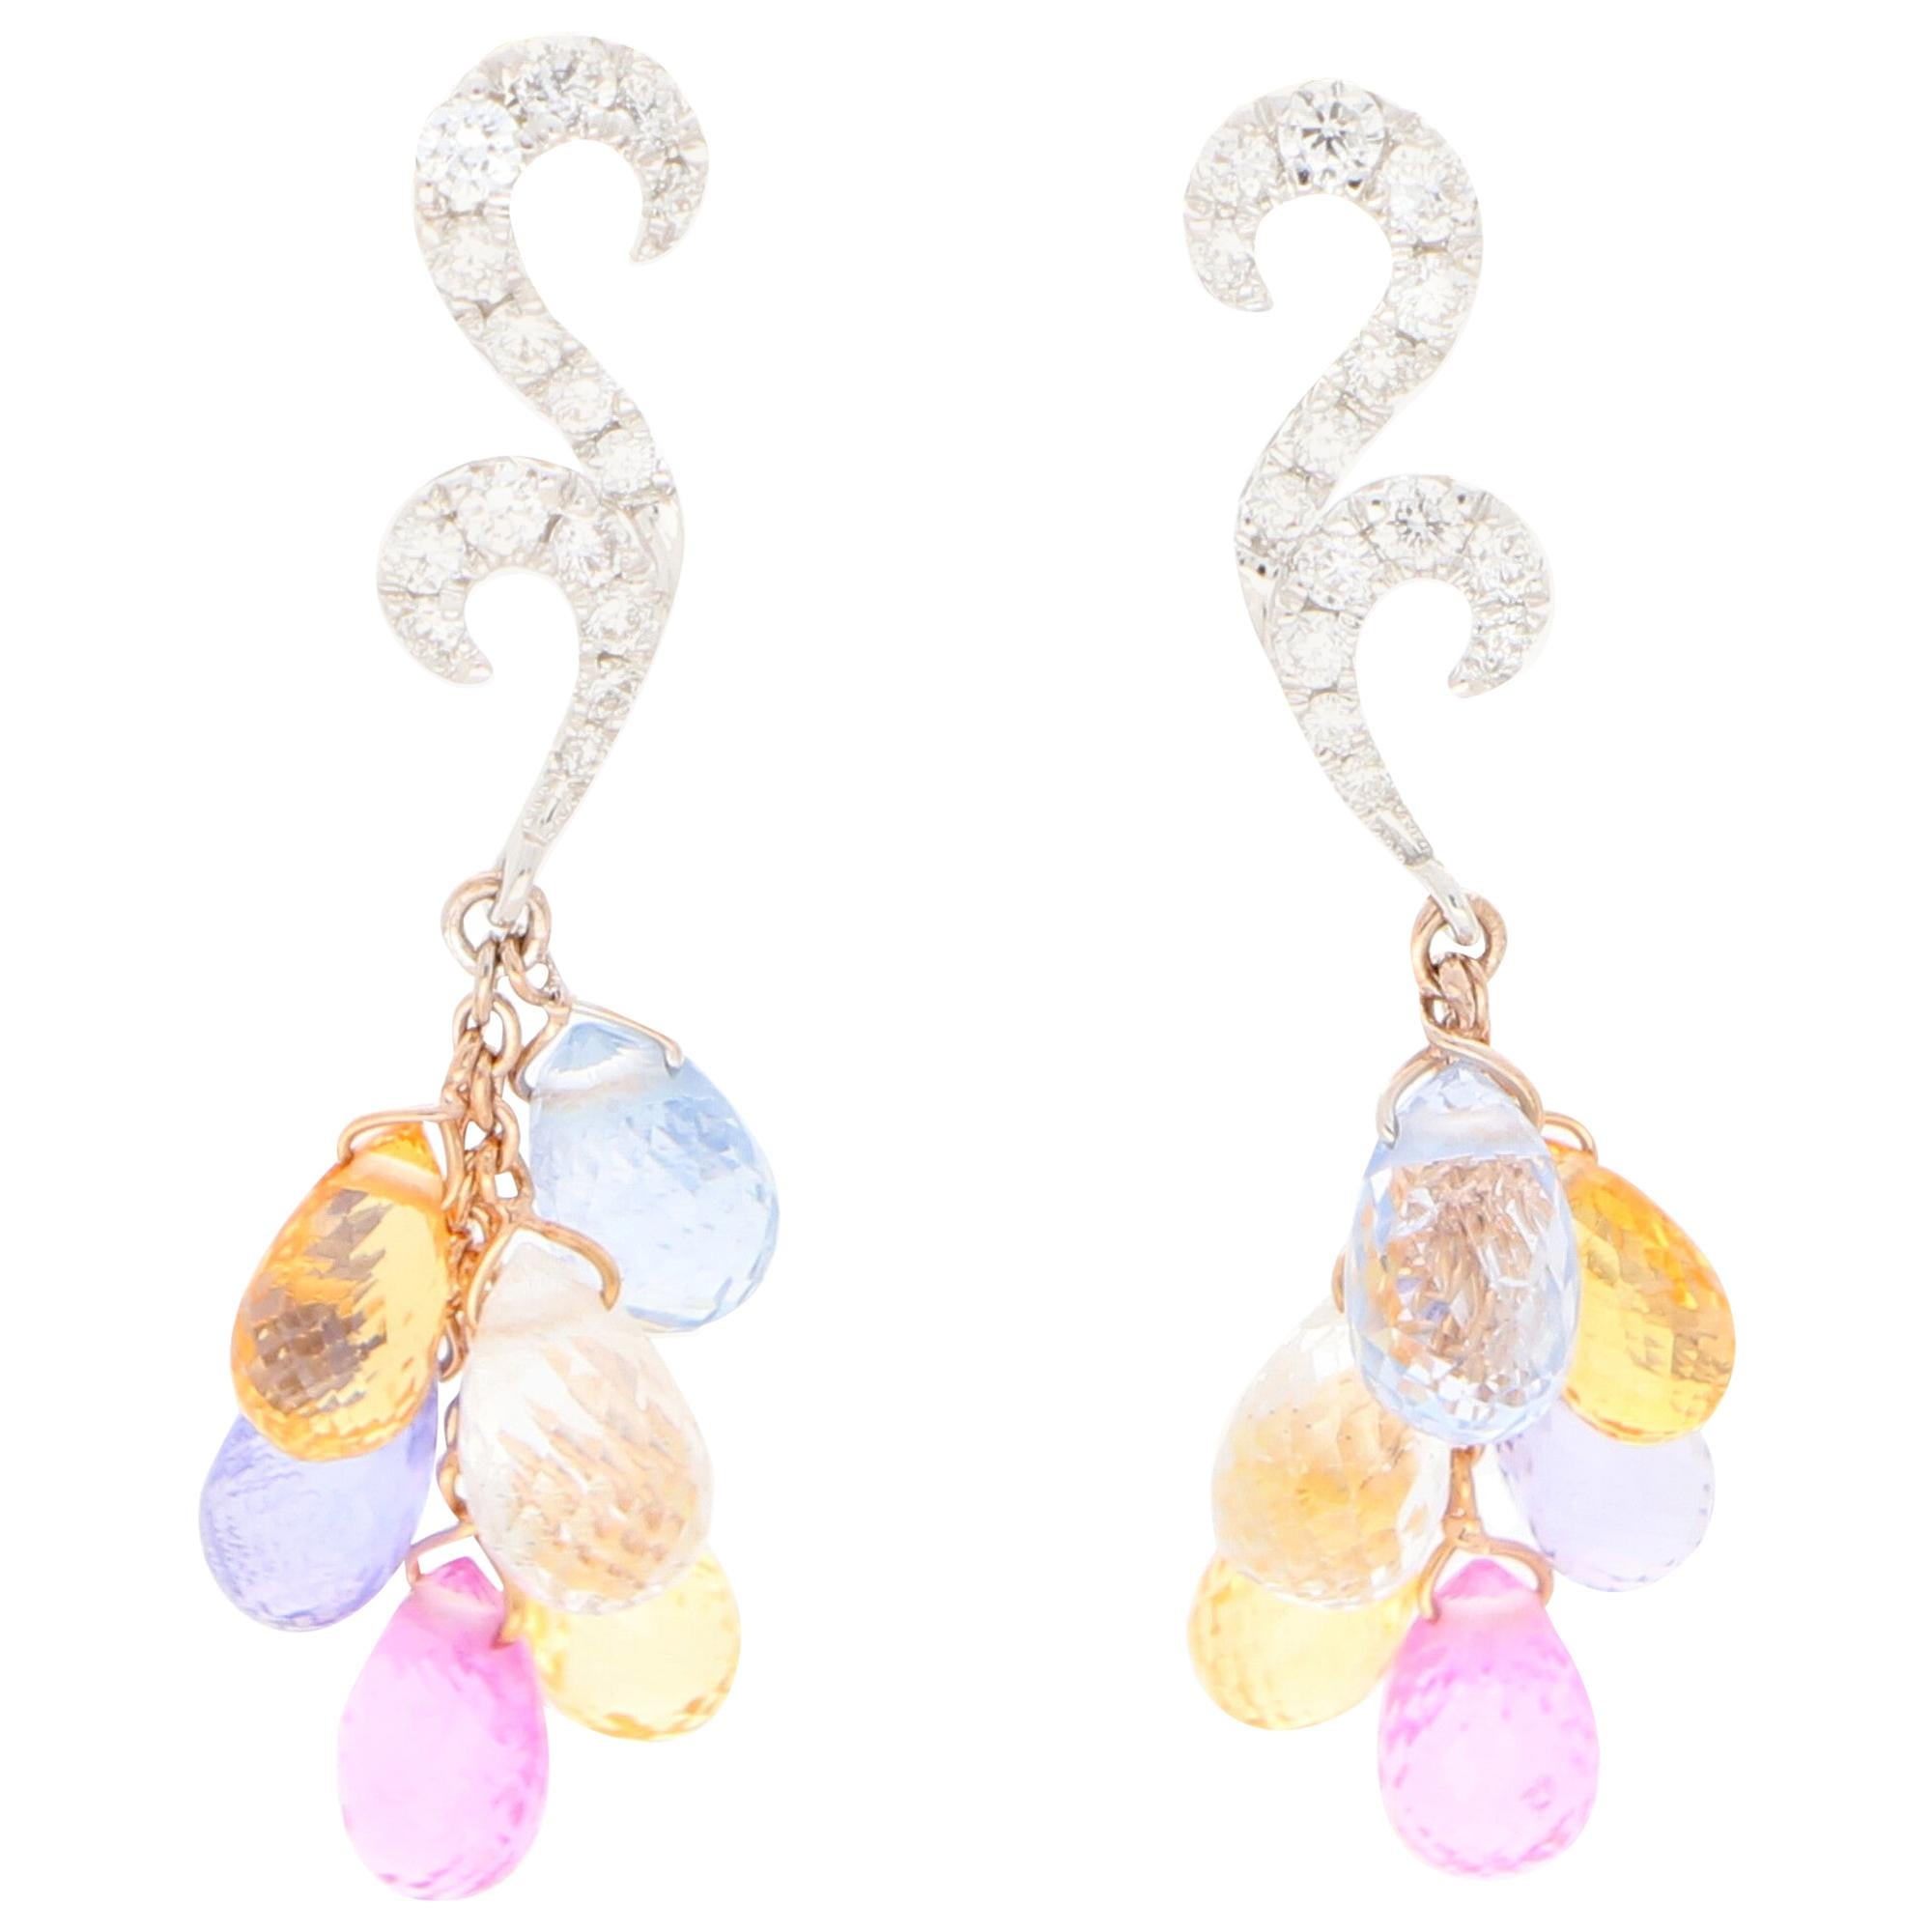 Pastel Rainbow Sapphire and Diamond Drop Earrings Set in 18k White and Rose Gold